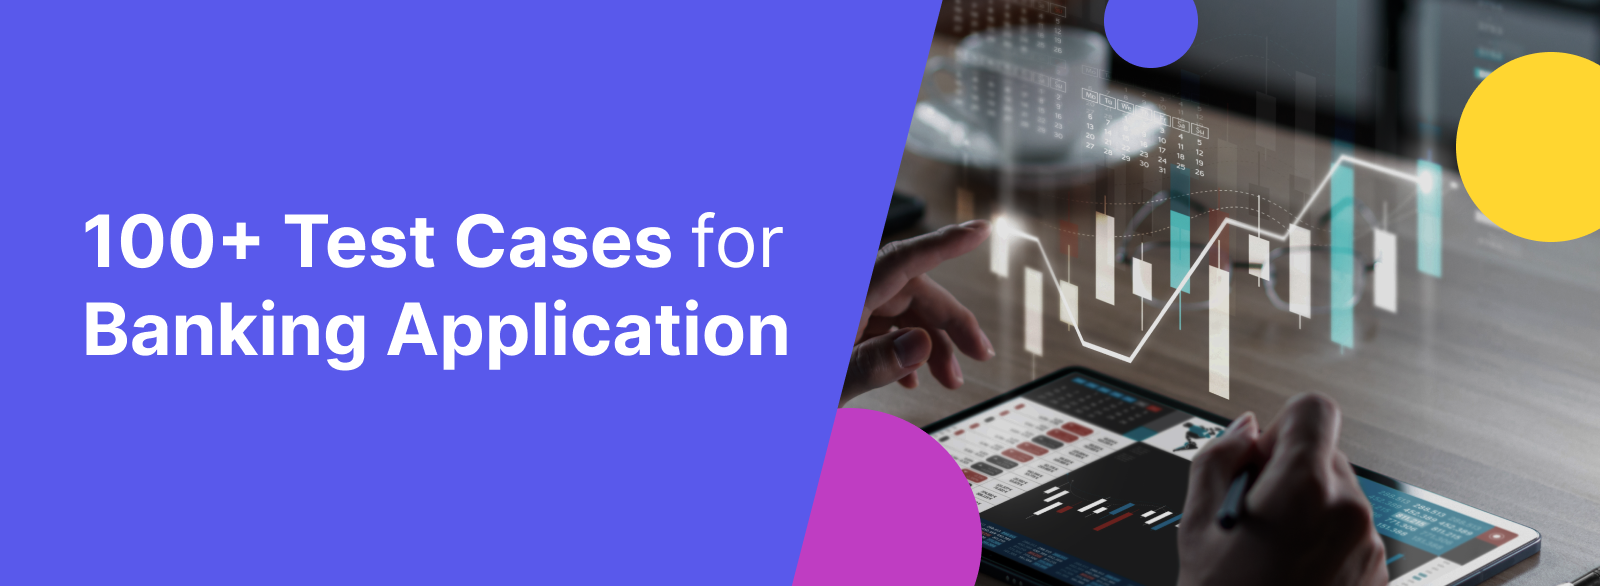 100 test cases for banking applications